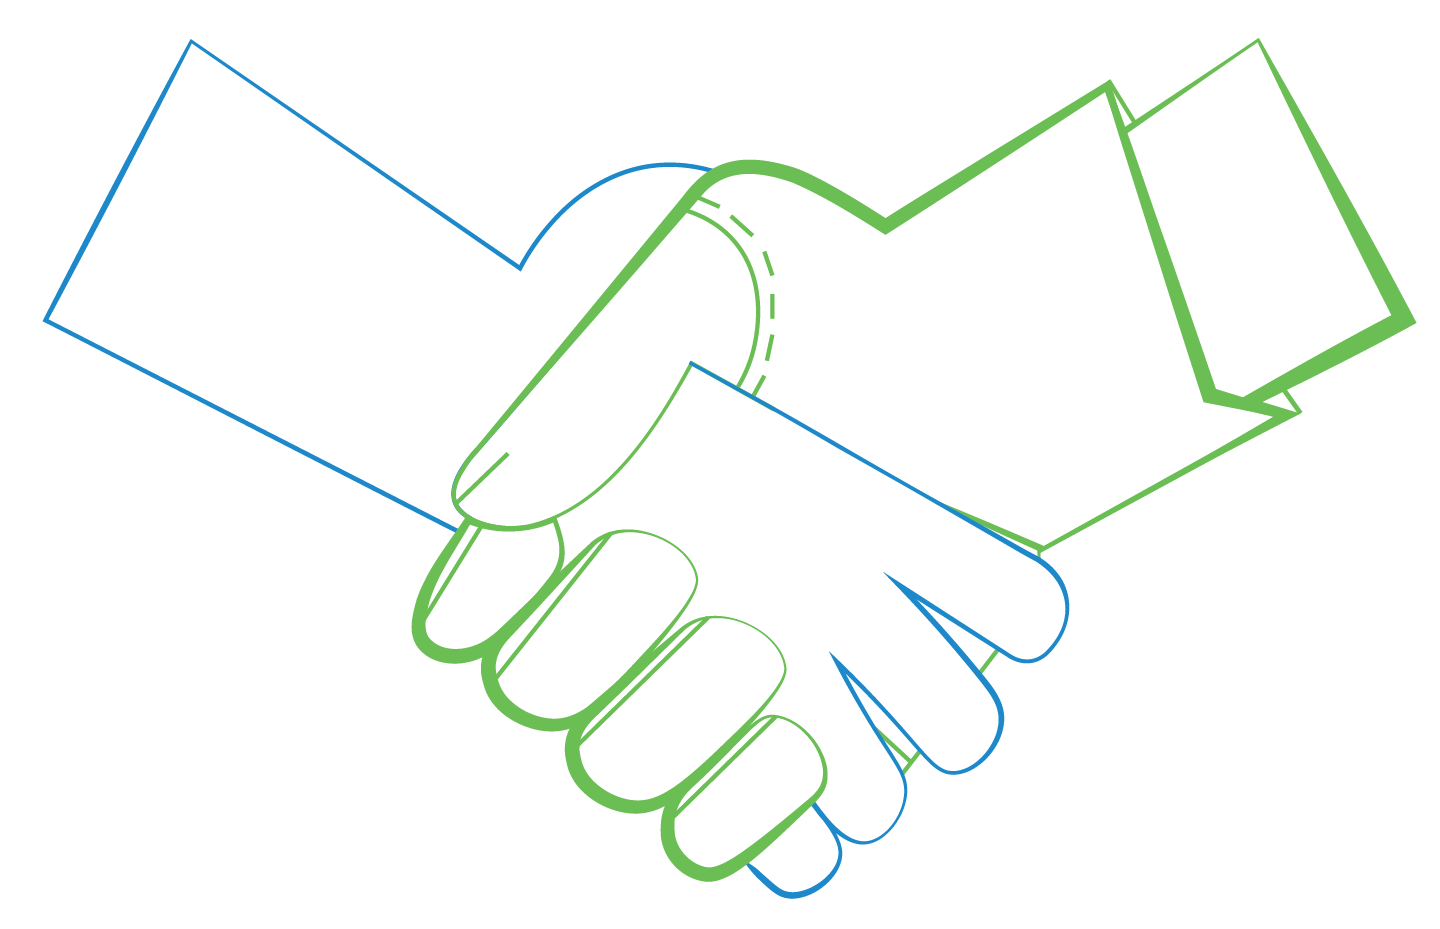 line-drawing of a hand sketched in blue shaking hands with another wearing a gardening/work glove, sketched in green